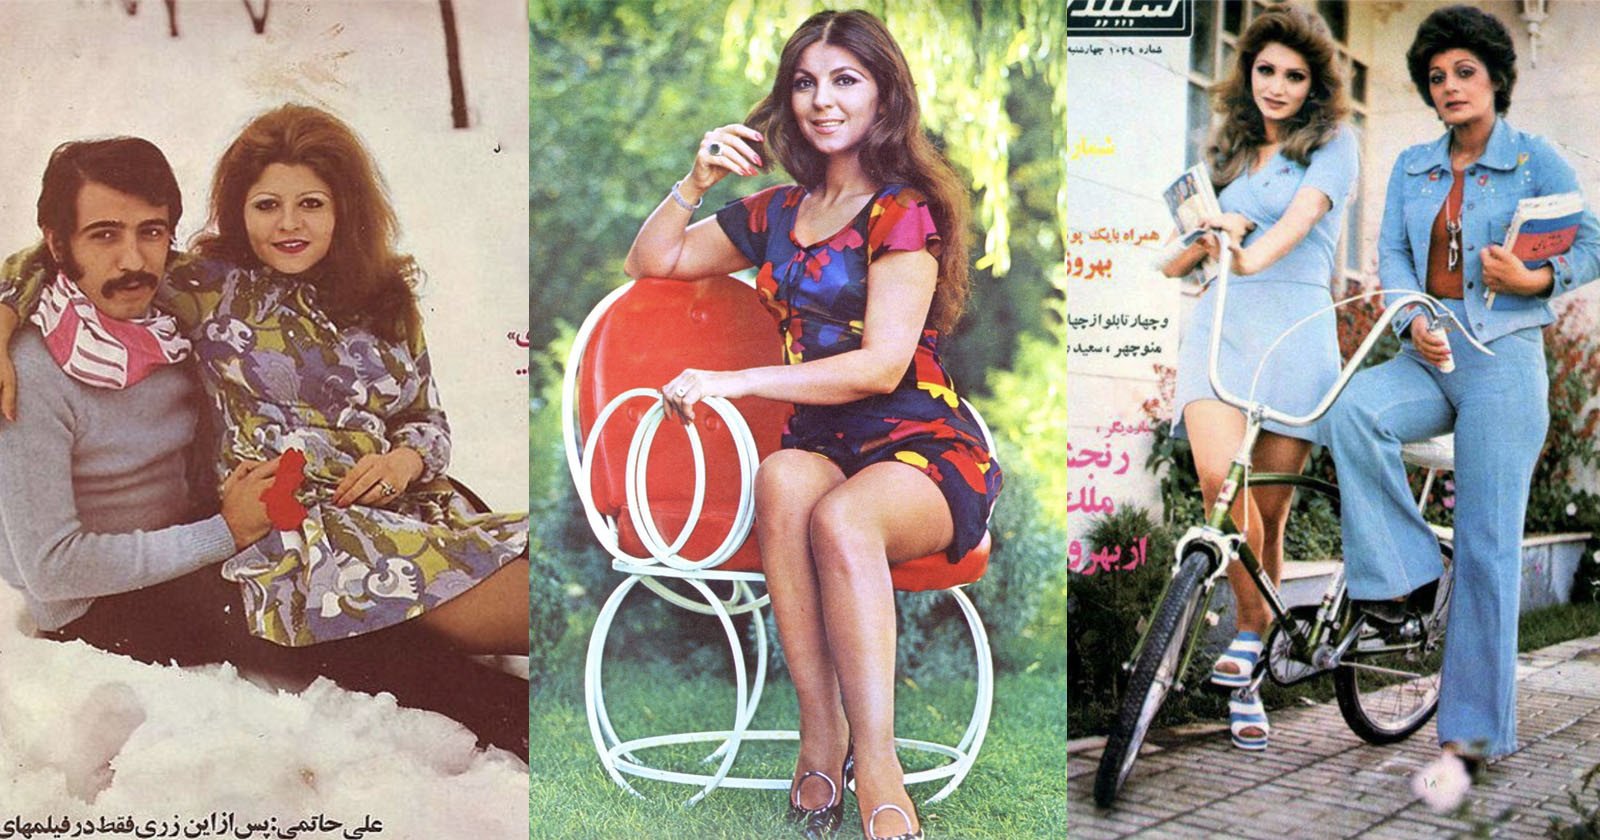 Photos Show What Life Looked Like for Iranian Women Before 1979 Revolution